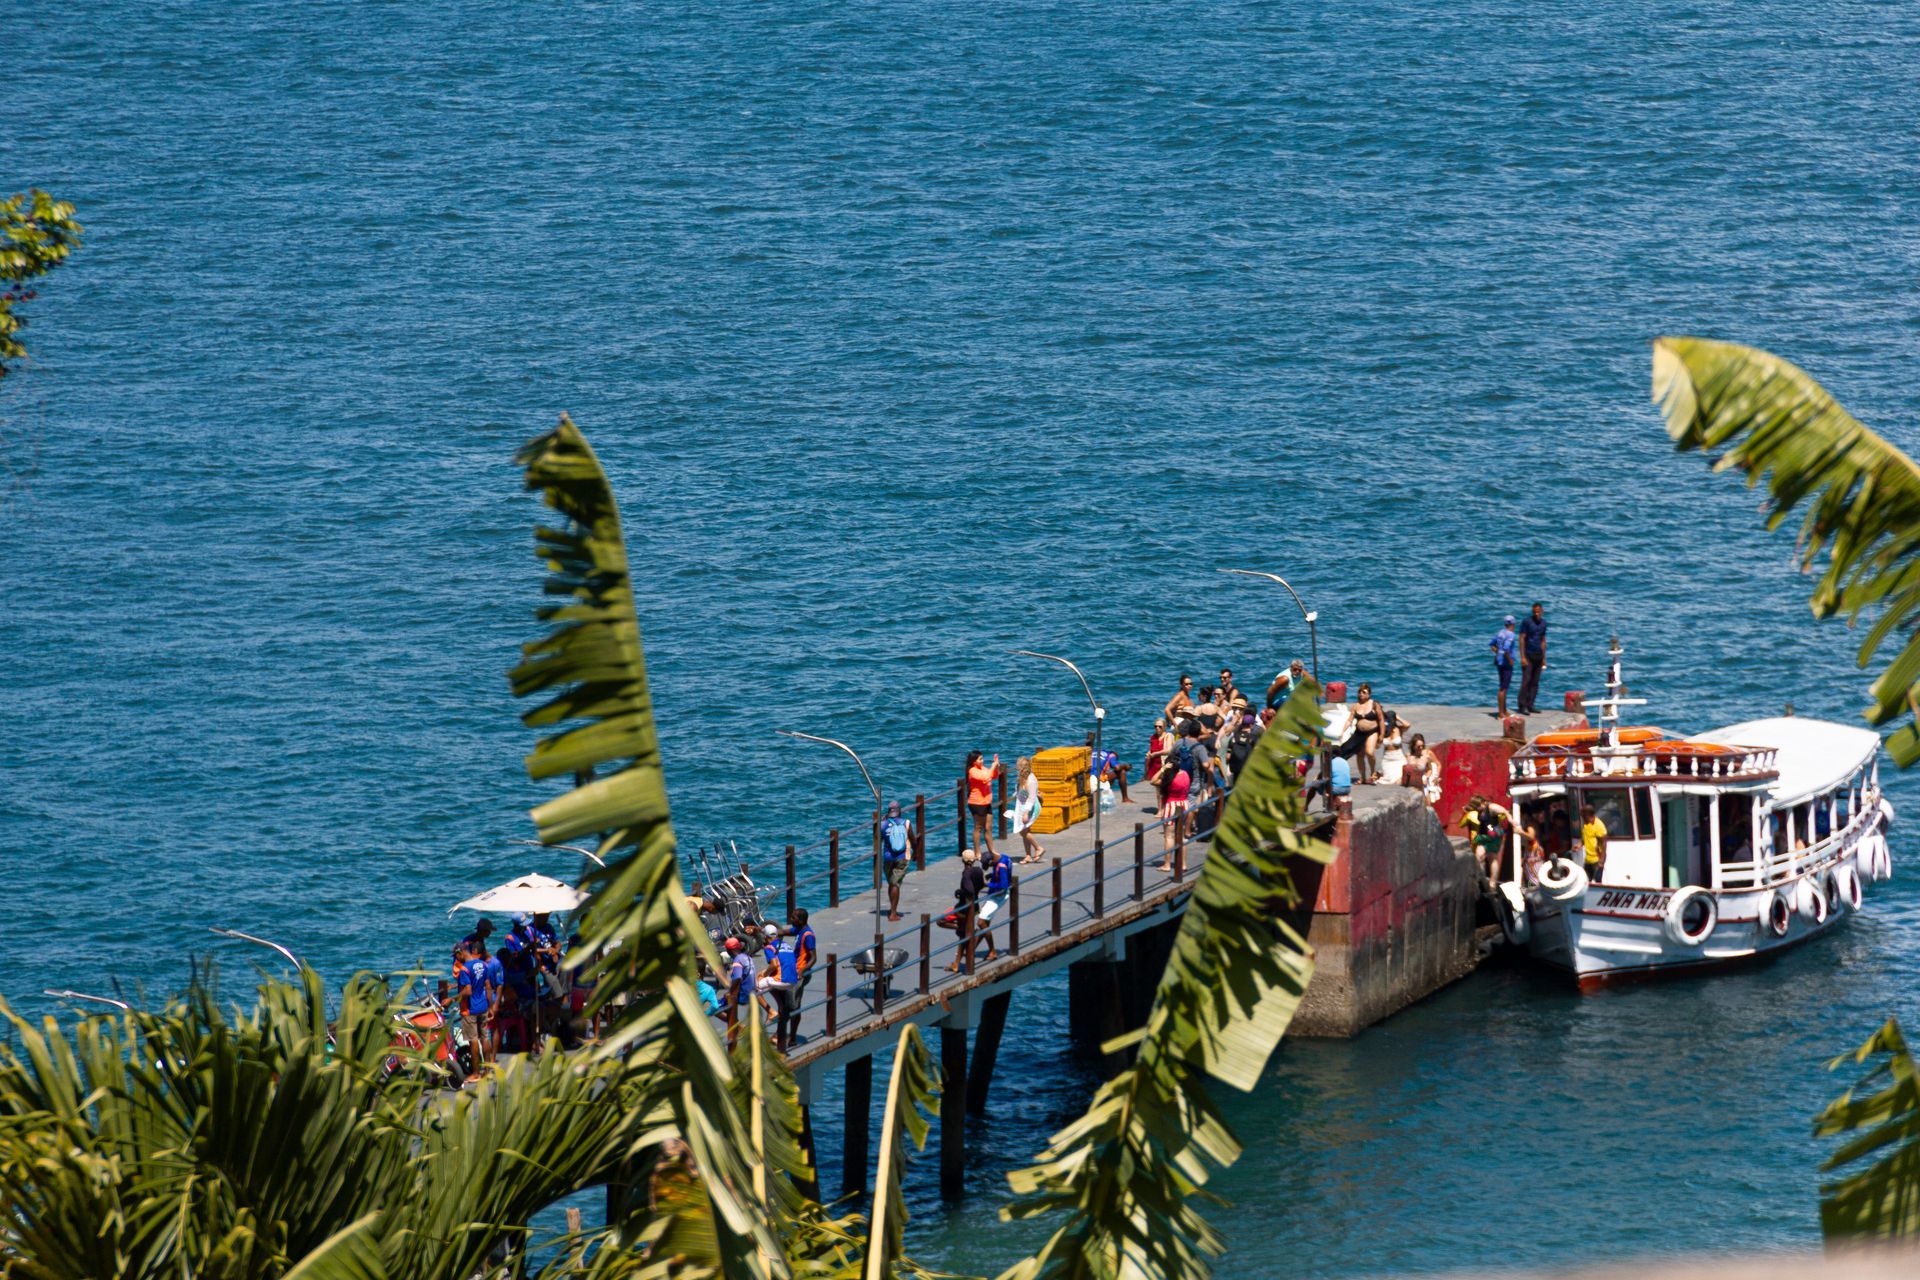 a boat is docked at a pier with people standing on it .